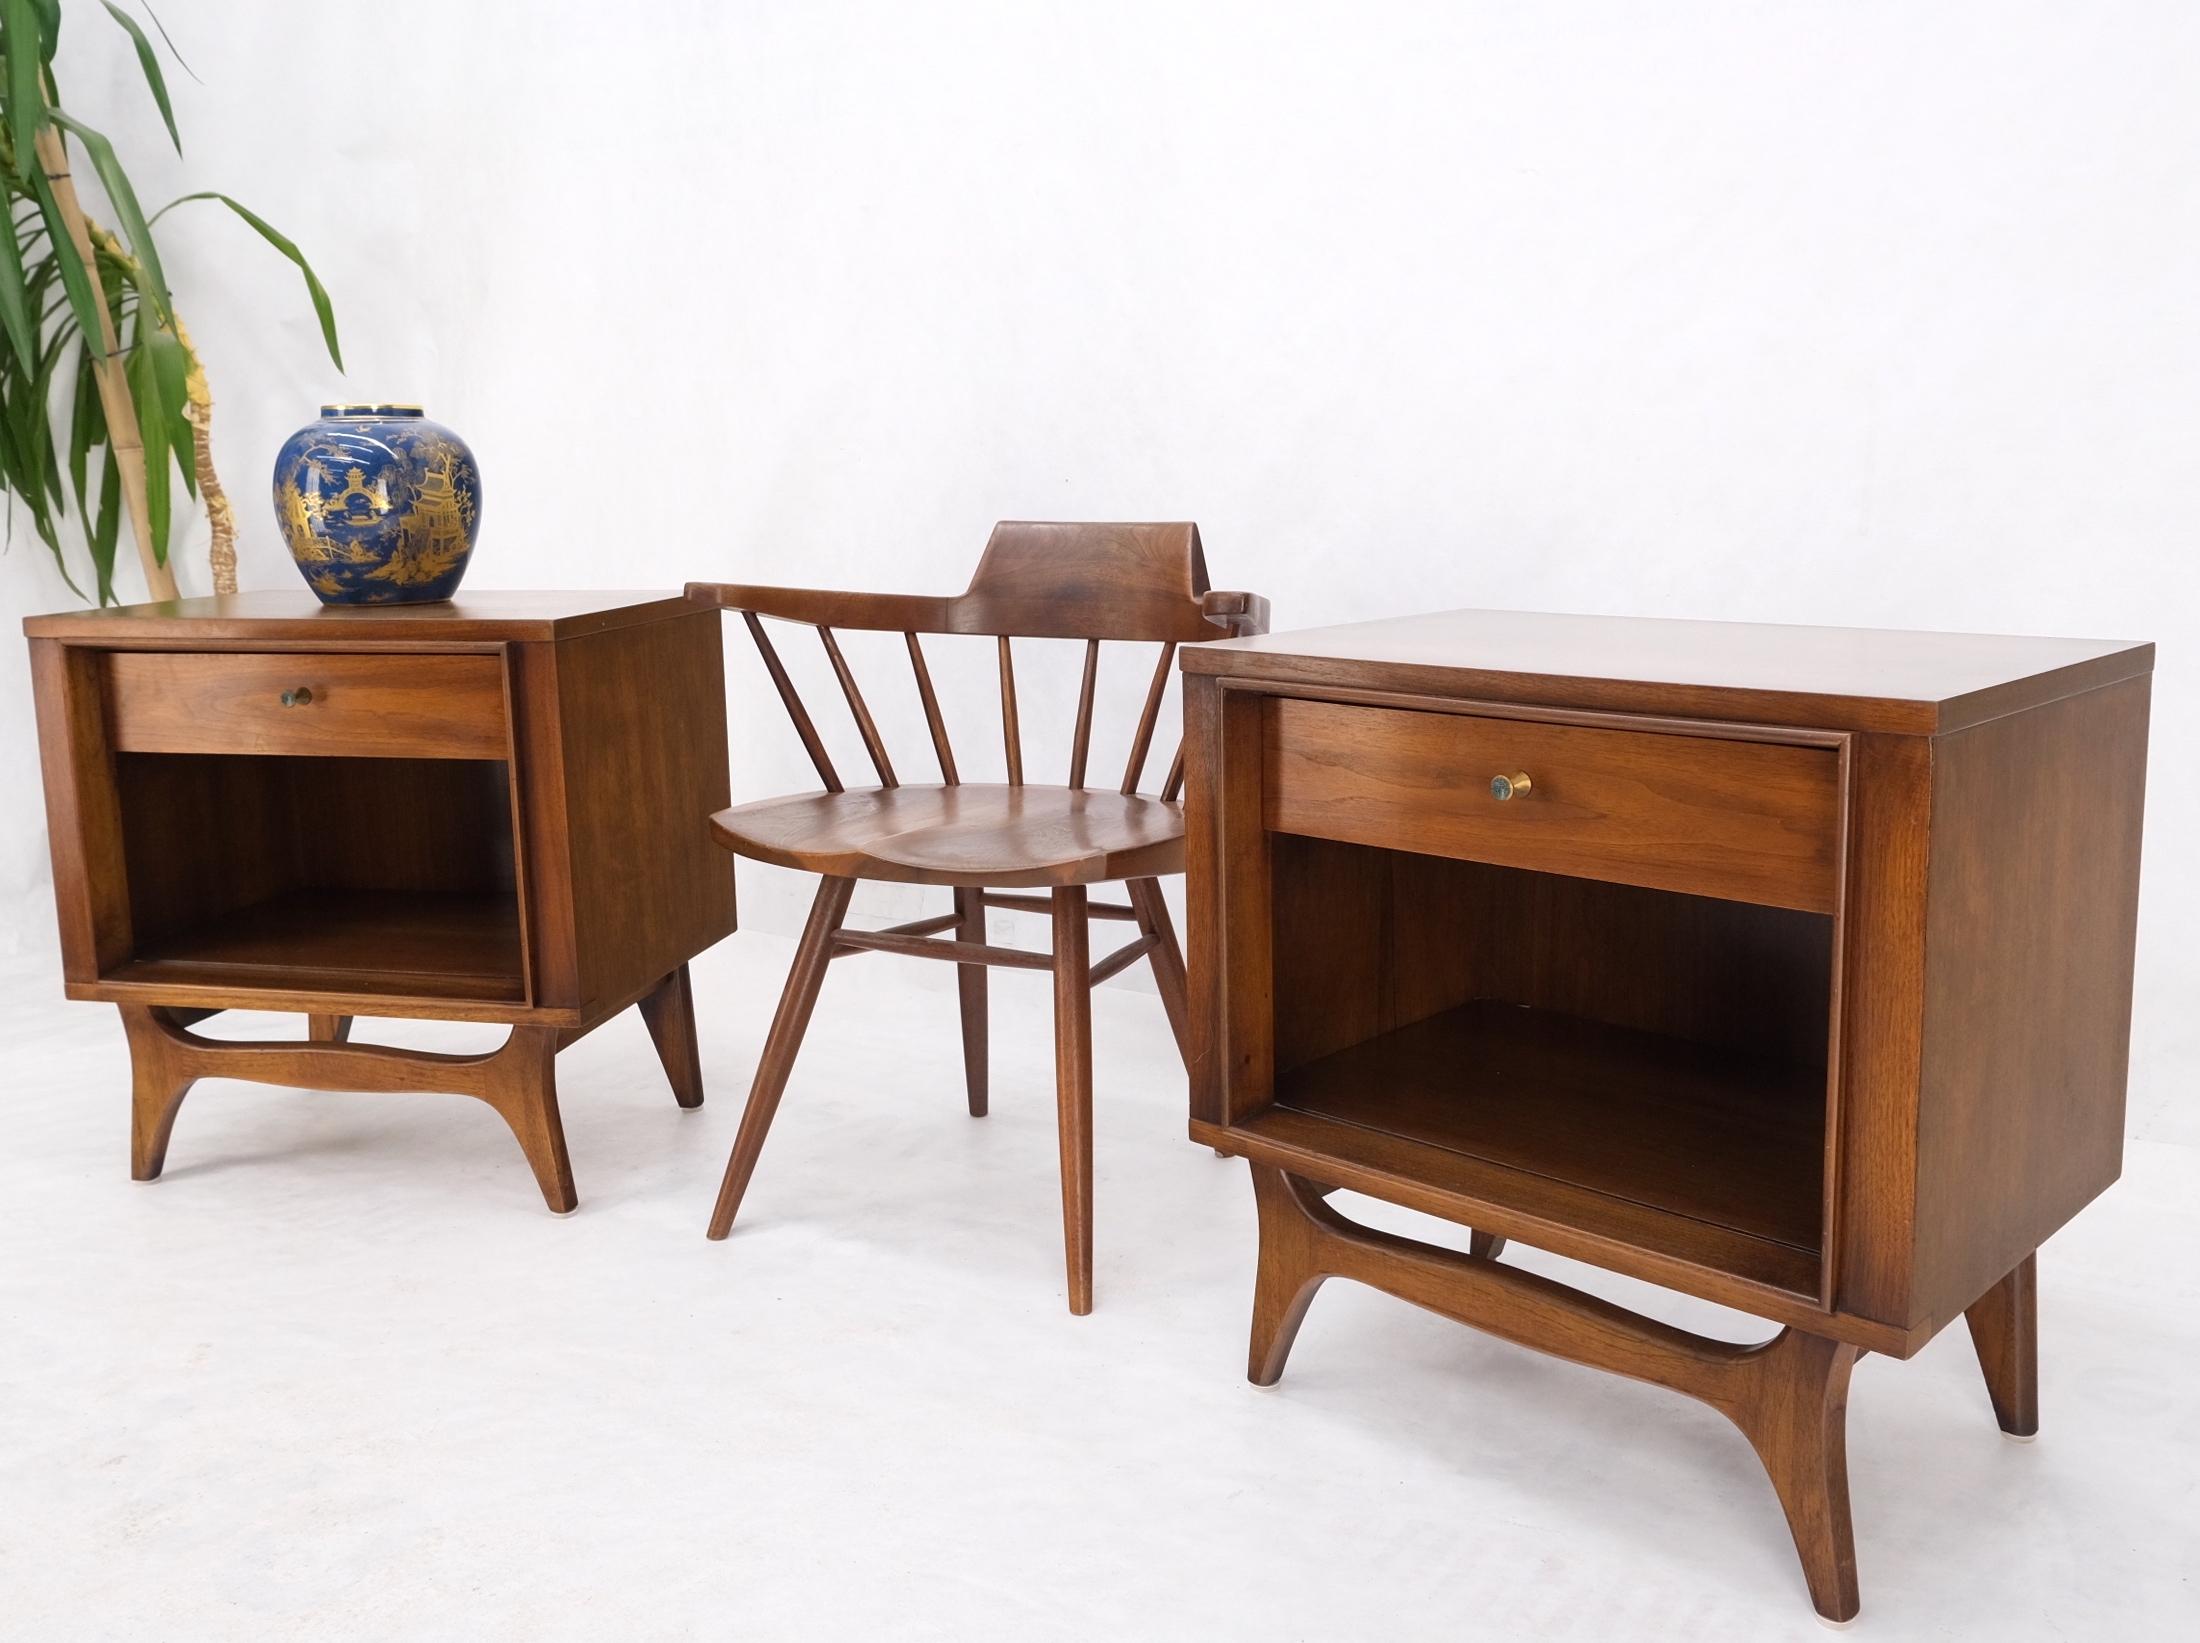 Pair walnut one drawer Mid-Century Modern end tables night stands MINT! Kagan Pearsall decor match.